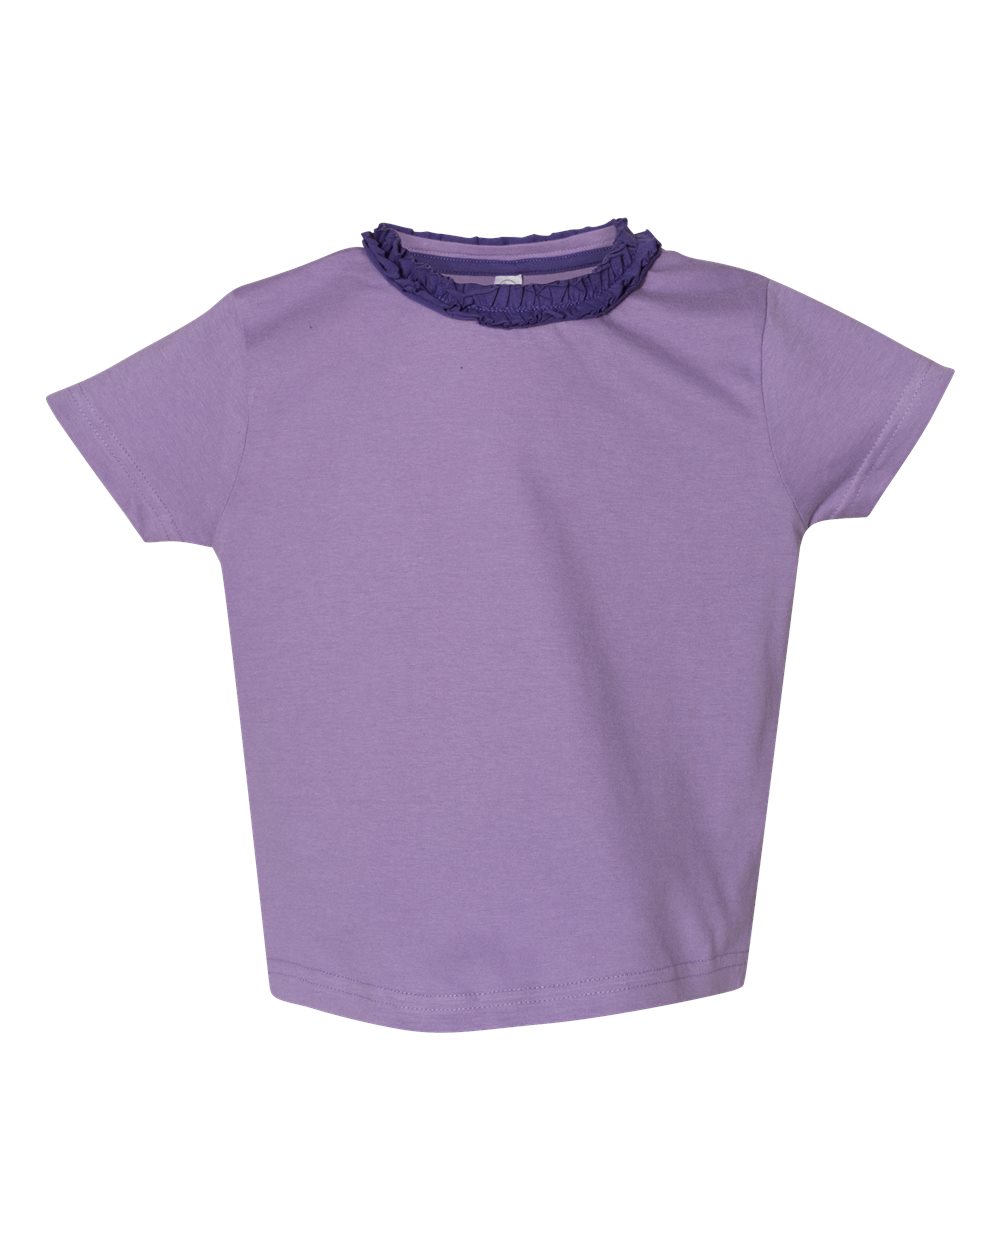 Rabbit Skins &#xAE;-Toddler Girls&#x27; Ruffle Neck Fine Jersey Tee 4.5oz 100% combed ringspun cotton fine jersey - 3329 | Comfortable &#x26; stylish cotton tees for kids of all ages, from infants to toddlers, in our collection of children&#x27;s jersey shirt